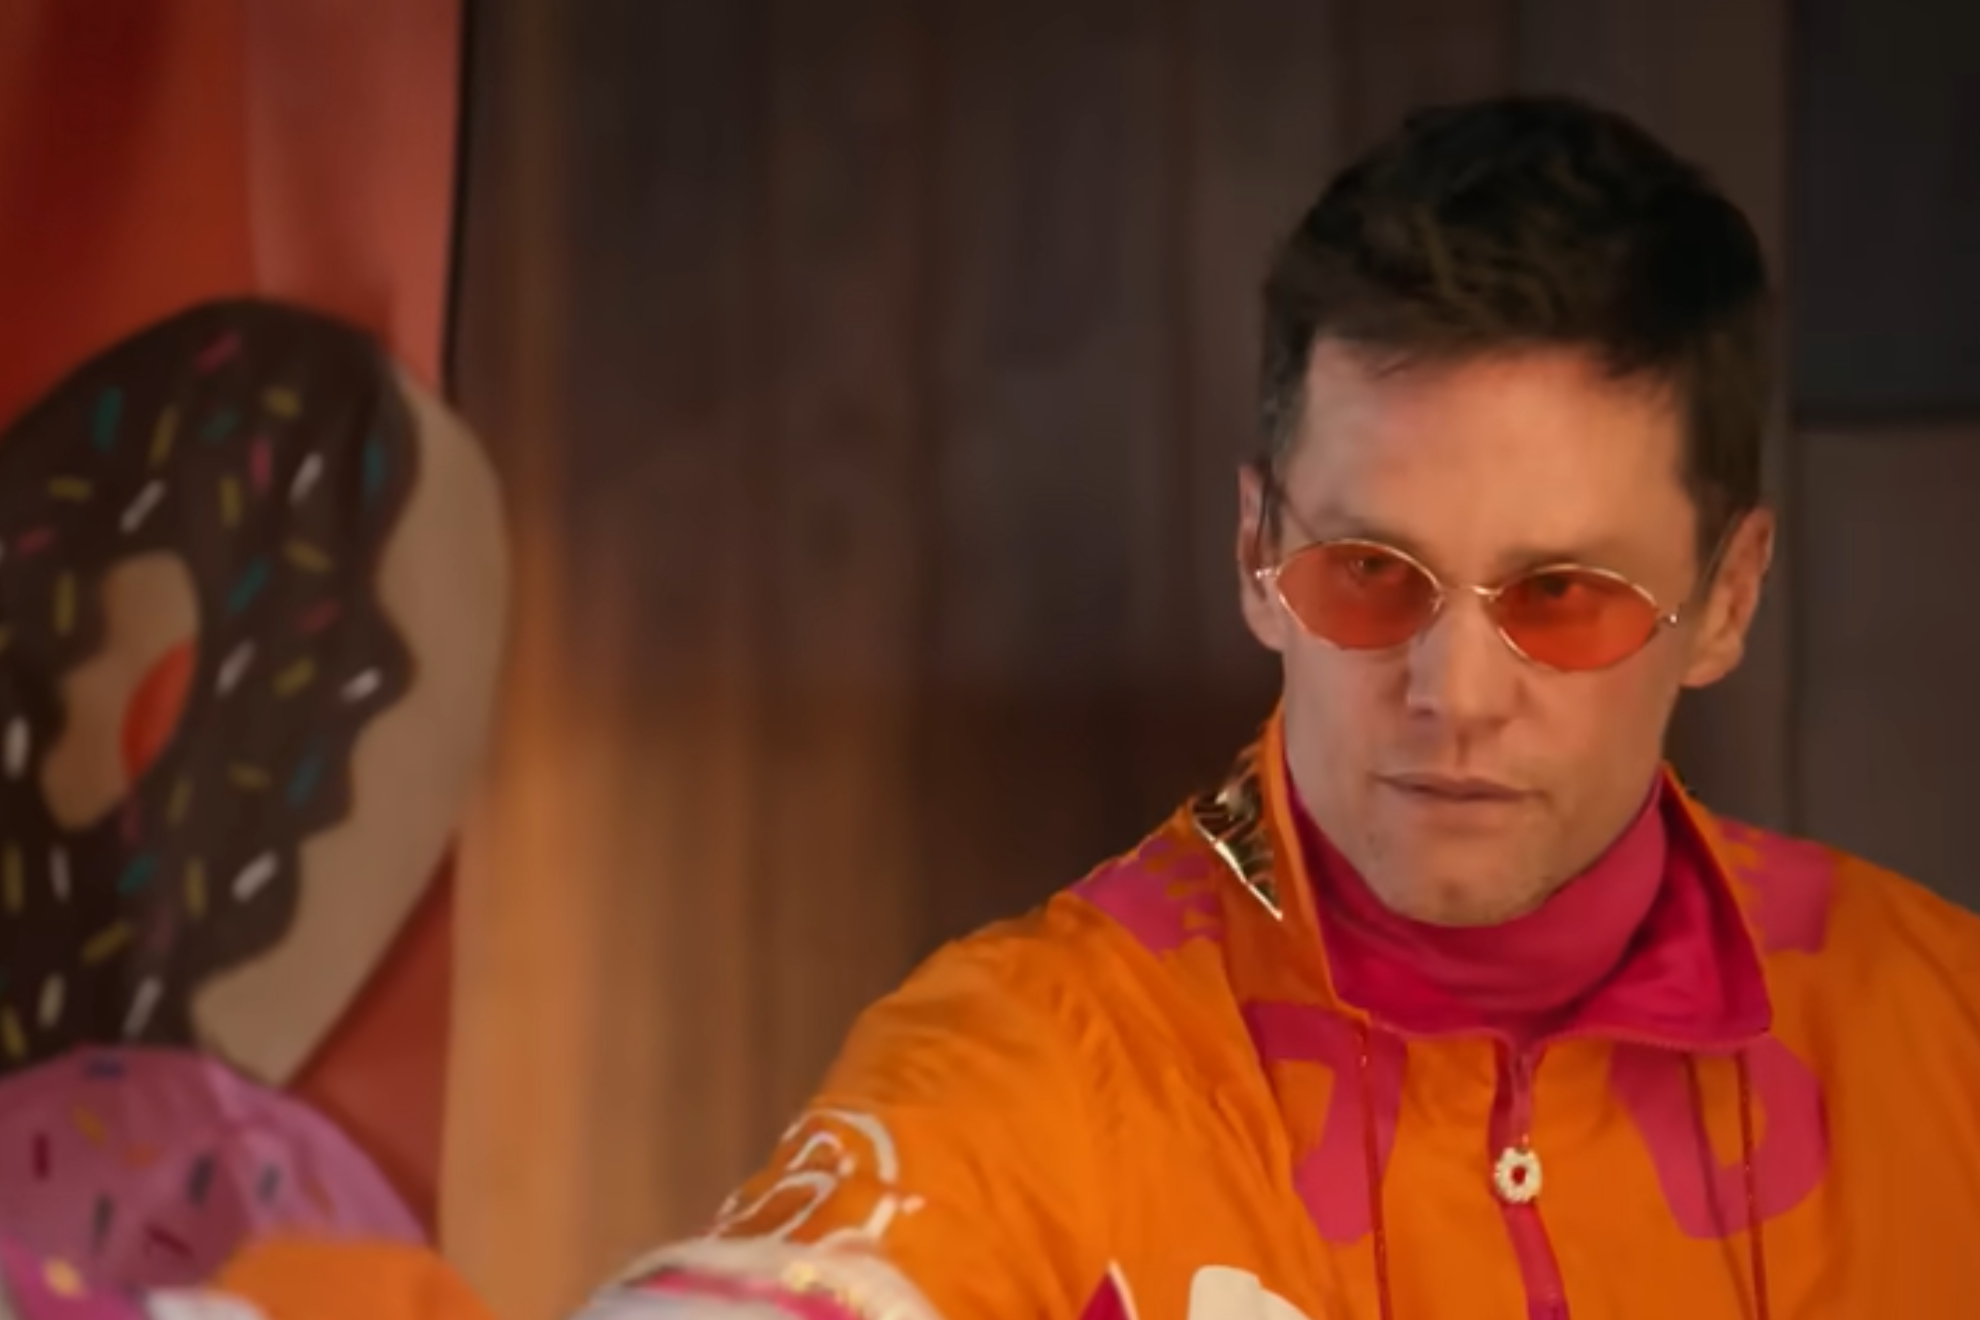 Ben Affleck recruits Tom Brady to his silly boy band in Super Bowl commercial